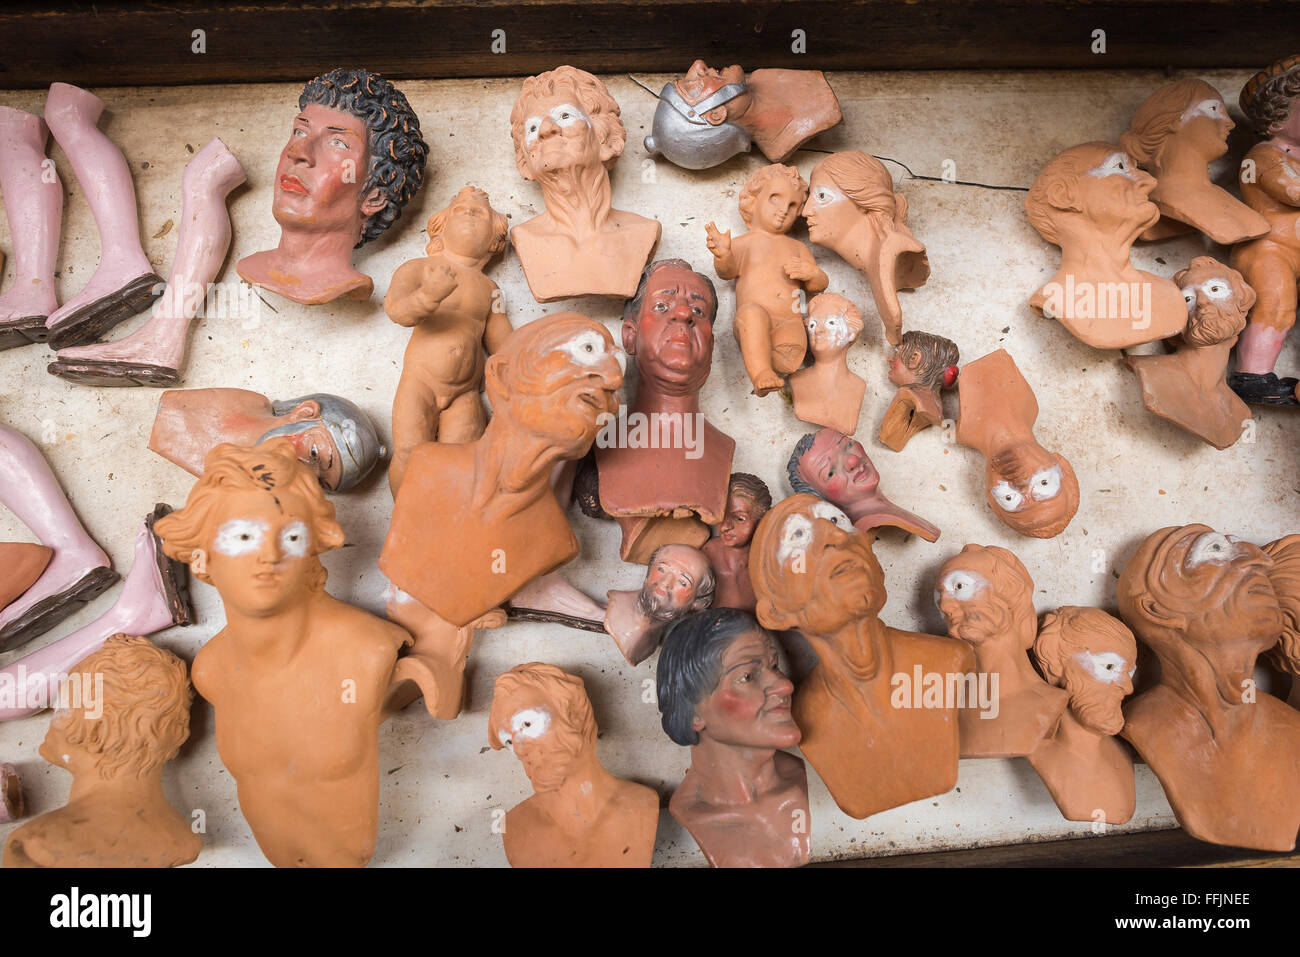 Naples crib shop, a batch of clay heads crafted by artisans in a crib shop in the Via San Gregorio Armeno, Naples, Campania, Italy. Stock Photo